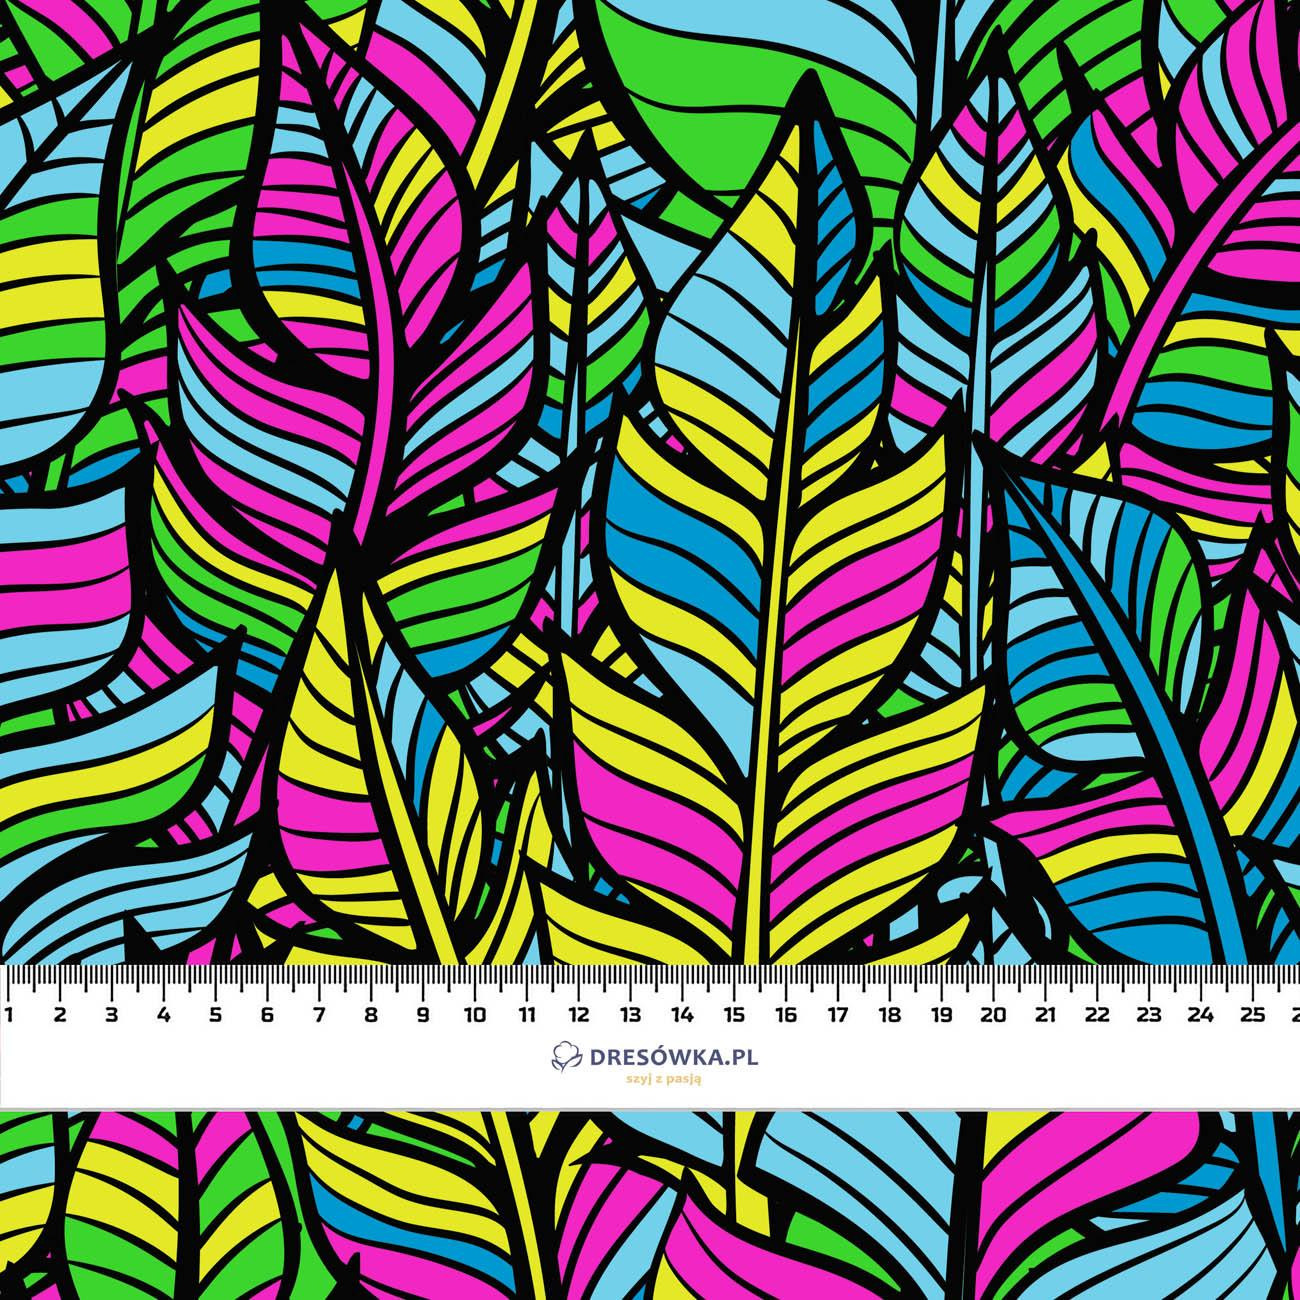 NEON LEAVES - Cotton woven fabric